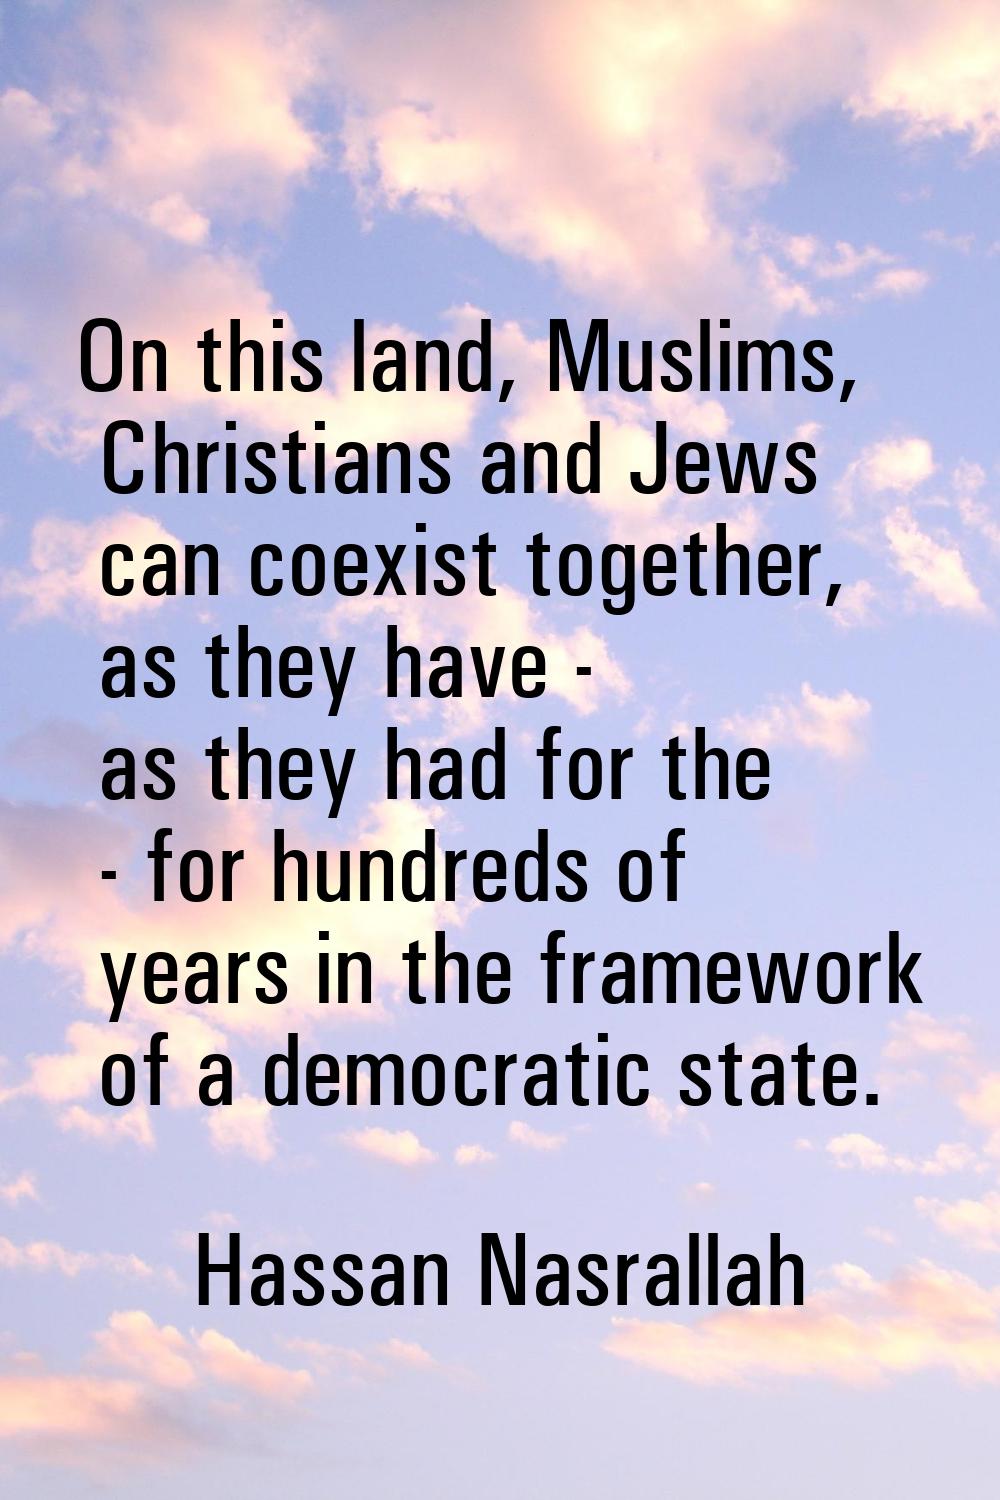 On this land, Muslims, Christians and Jews can coexist together, as they have - as they had for the